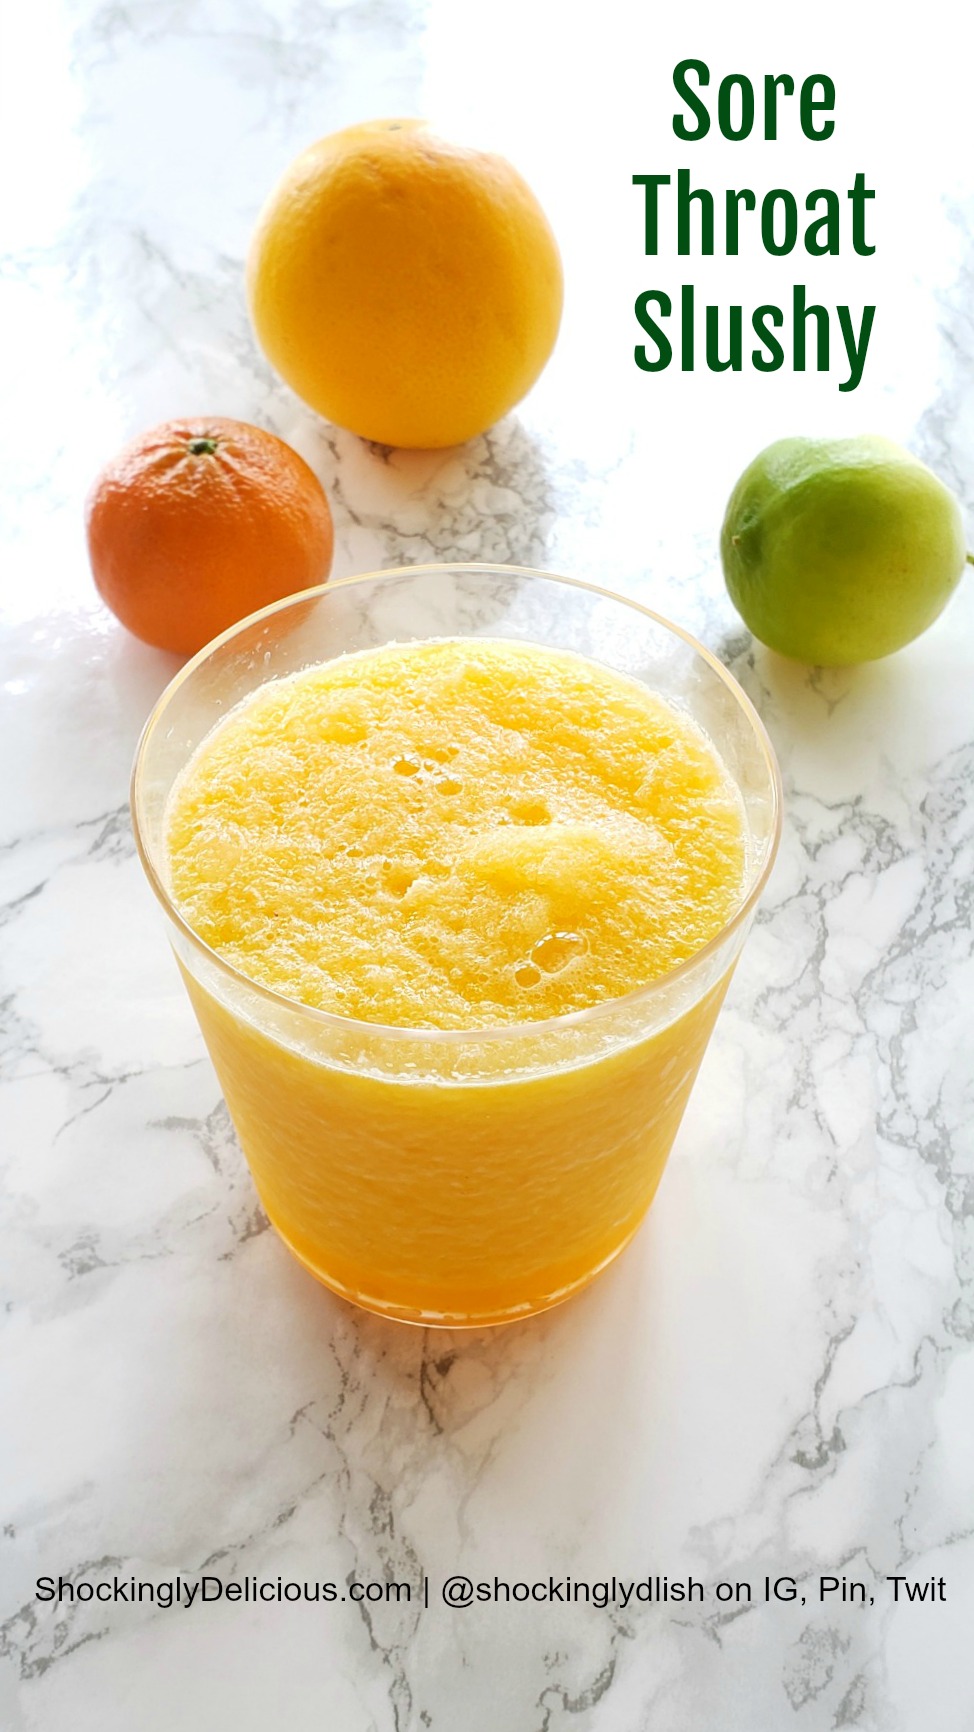 Sore Throat Slushy with a tangerine, orange and lime behind it on a white marble countertop